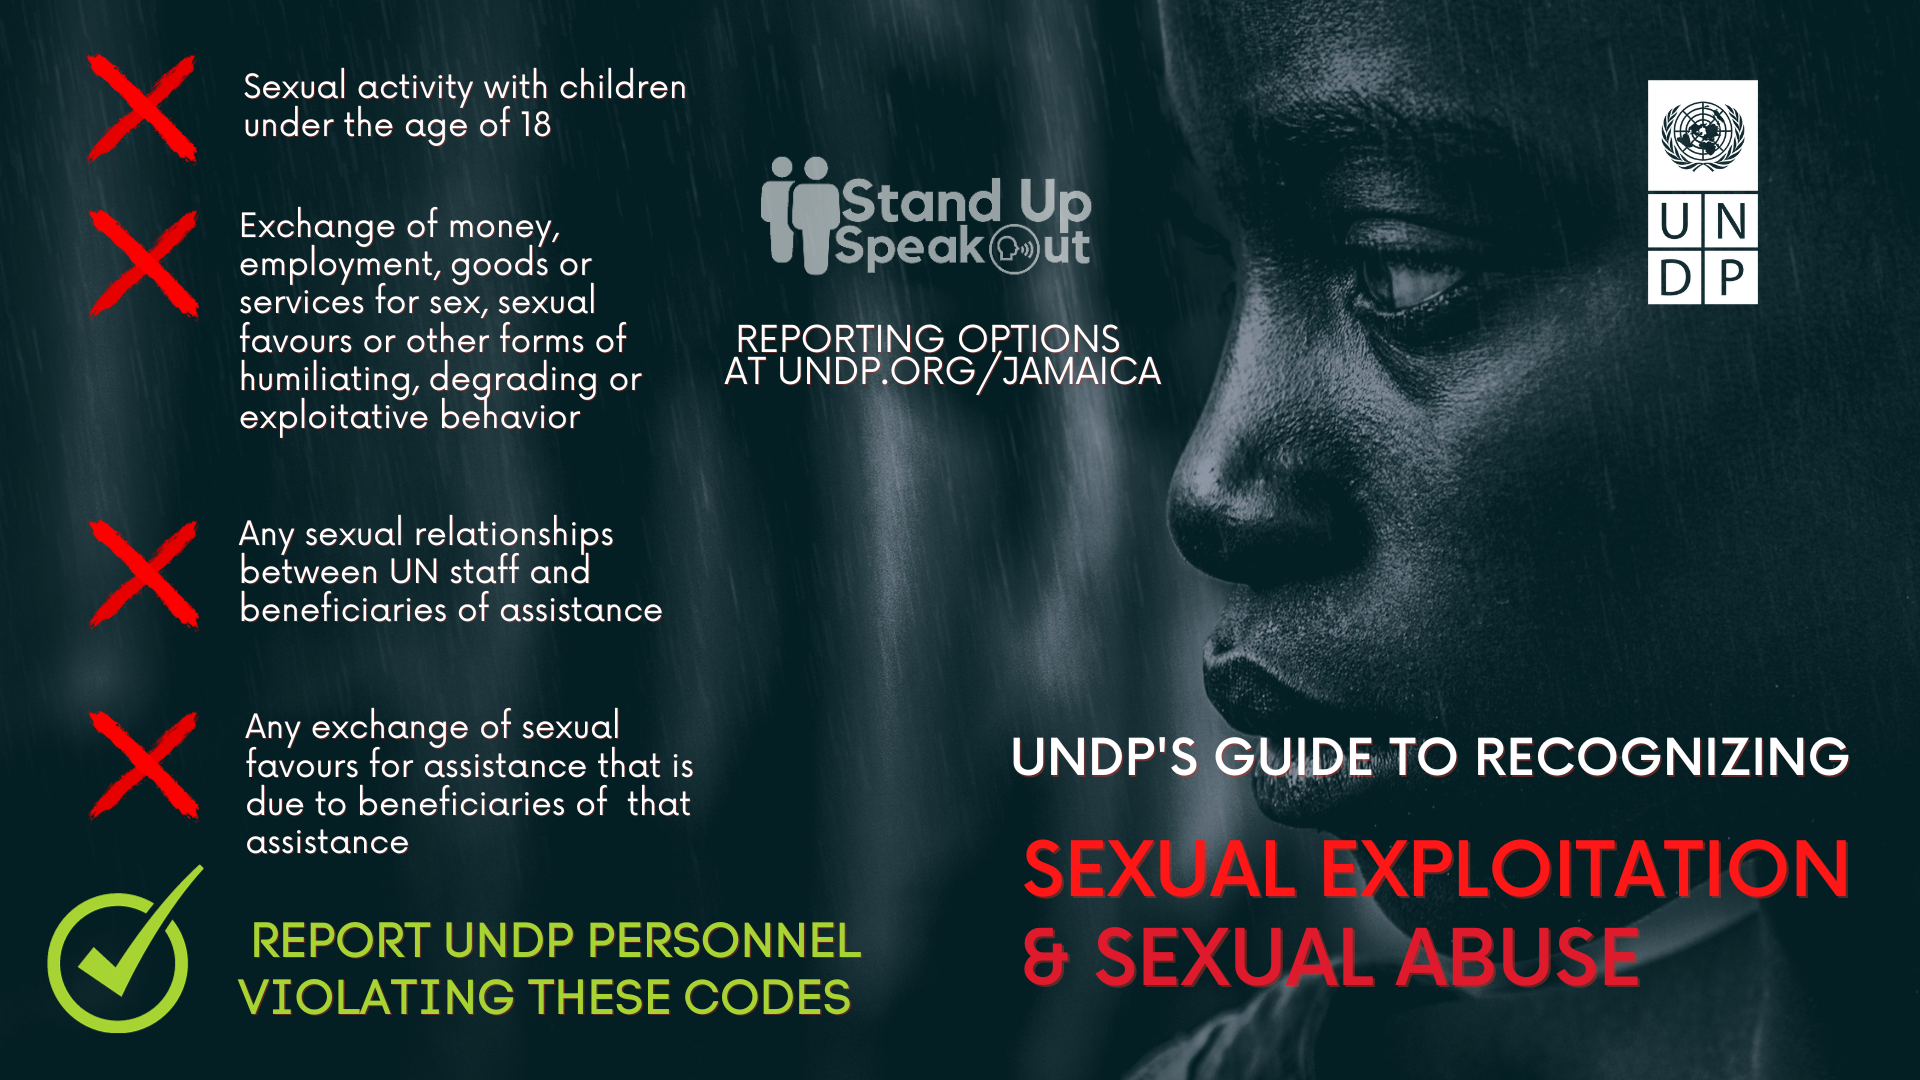 sexual exploitation and abuse are strictly prohibited